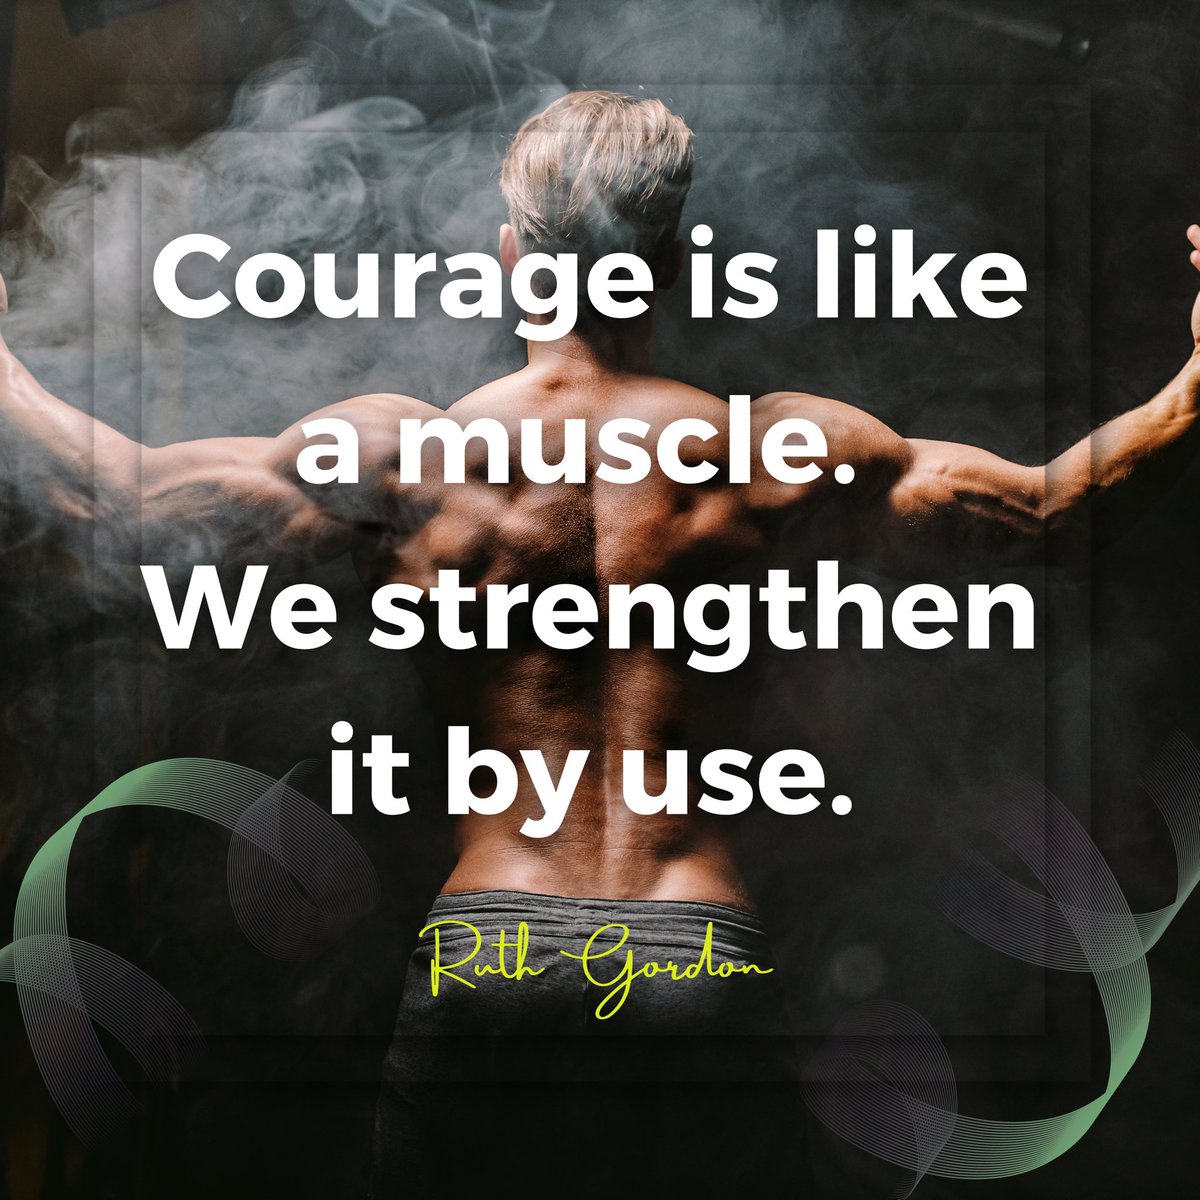 Courage, much like a muscle, grows stronger through regular use.

Embracing challenges and stepping out of your comfort zone are ways to exercise and fortify your courage. 
.
.
.
#courage #strength #overcomefear #facechallenges #innerstrength #bravery #selfImprovement #growthmind